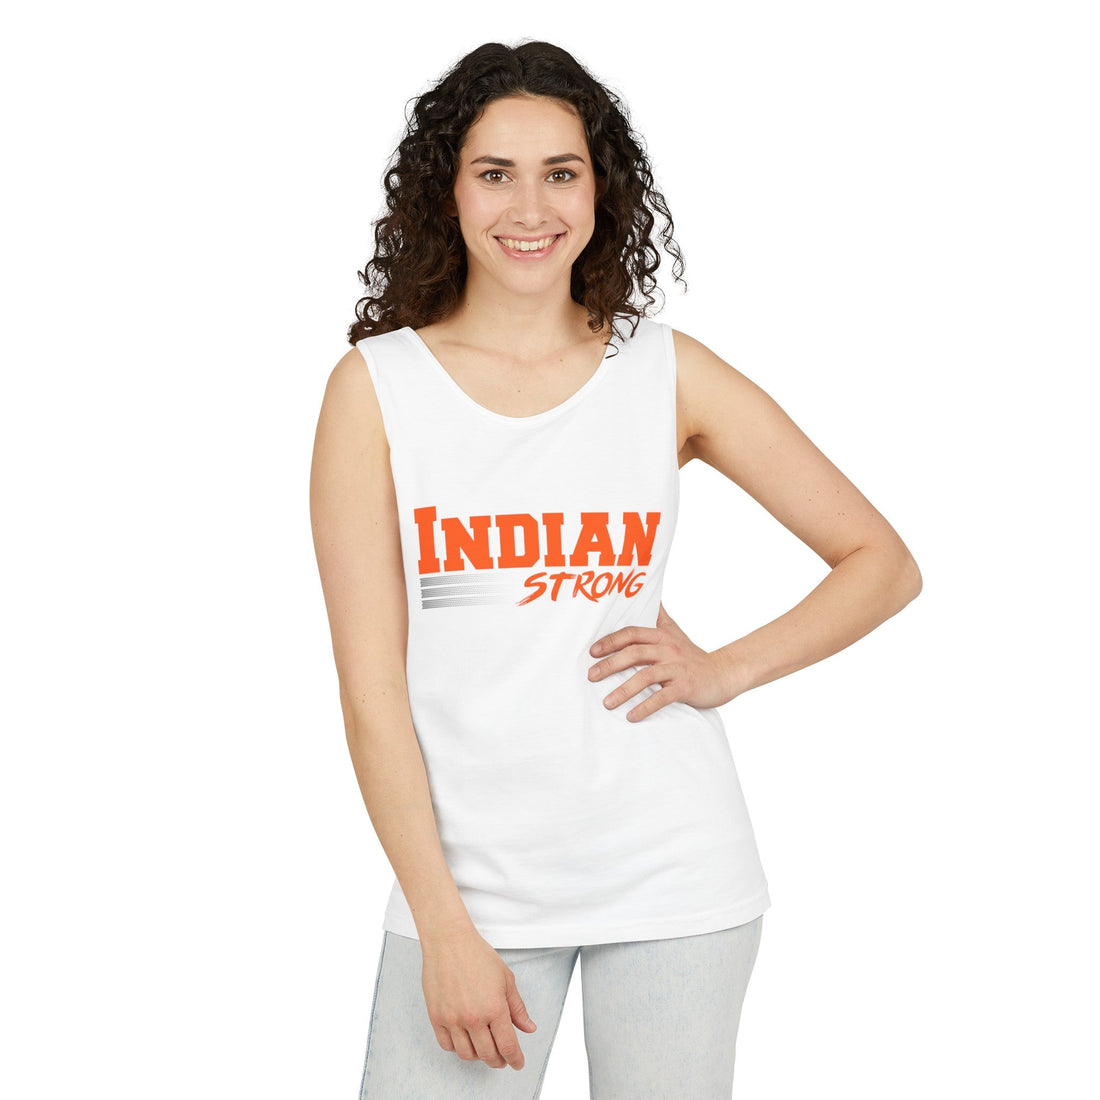 Indian Strong Unisex Garment - Dyed Tank Top - Tank Top - Positively Sassy - Indian Strong Unisex Garment - Dyed Tank Top